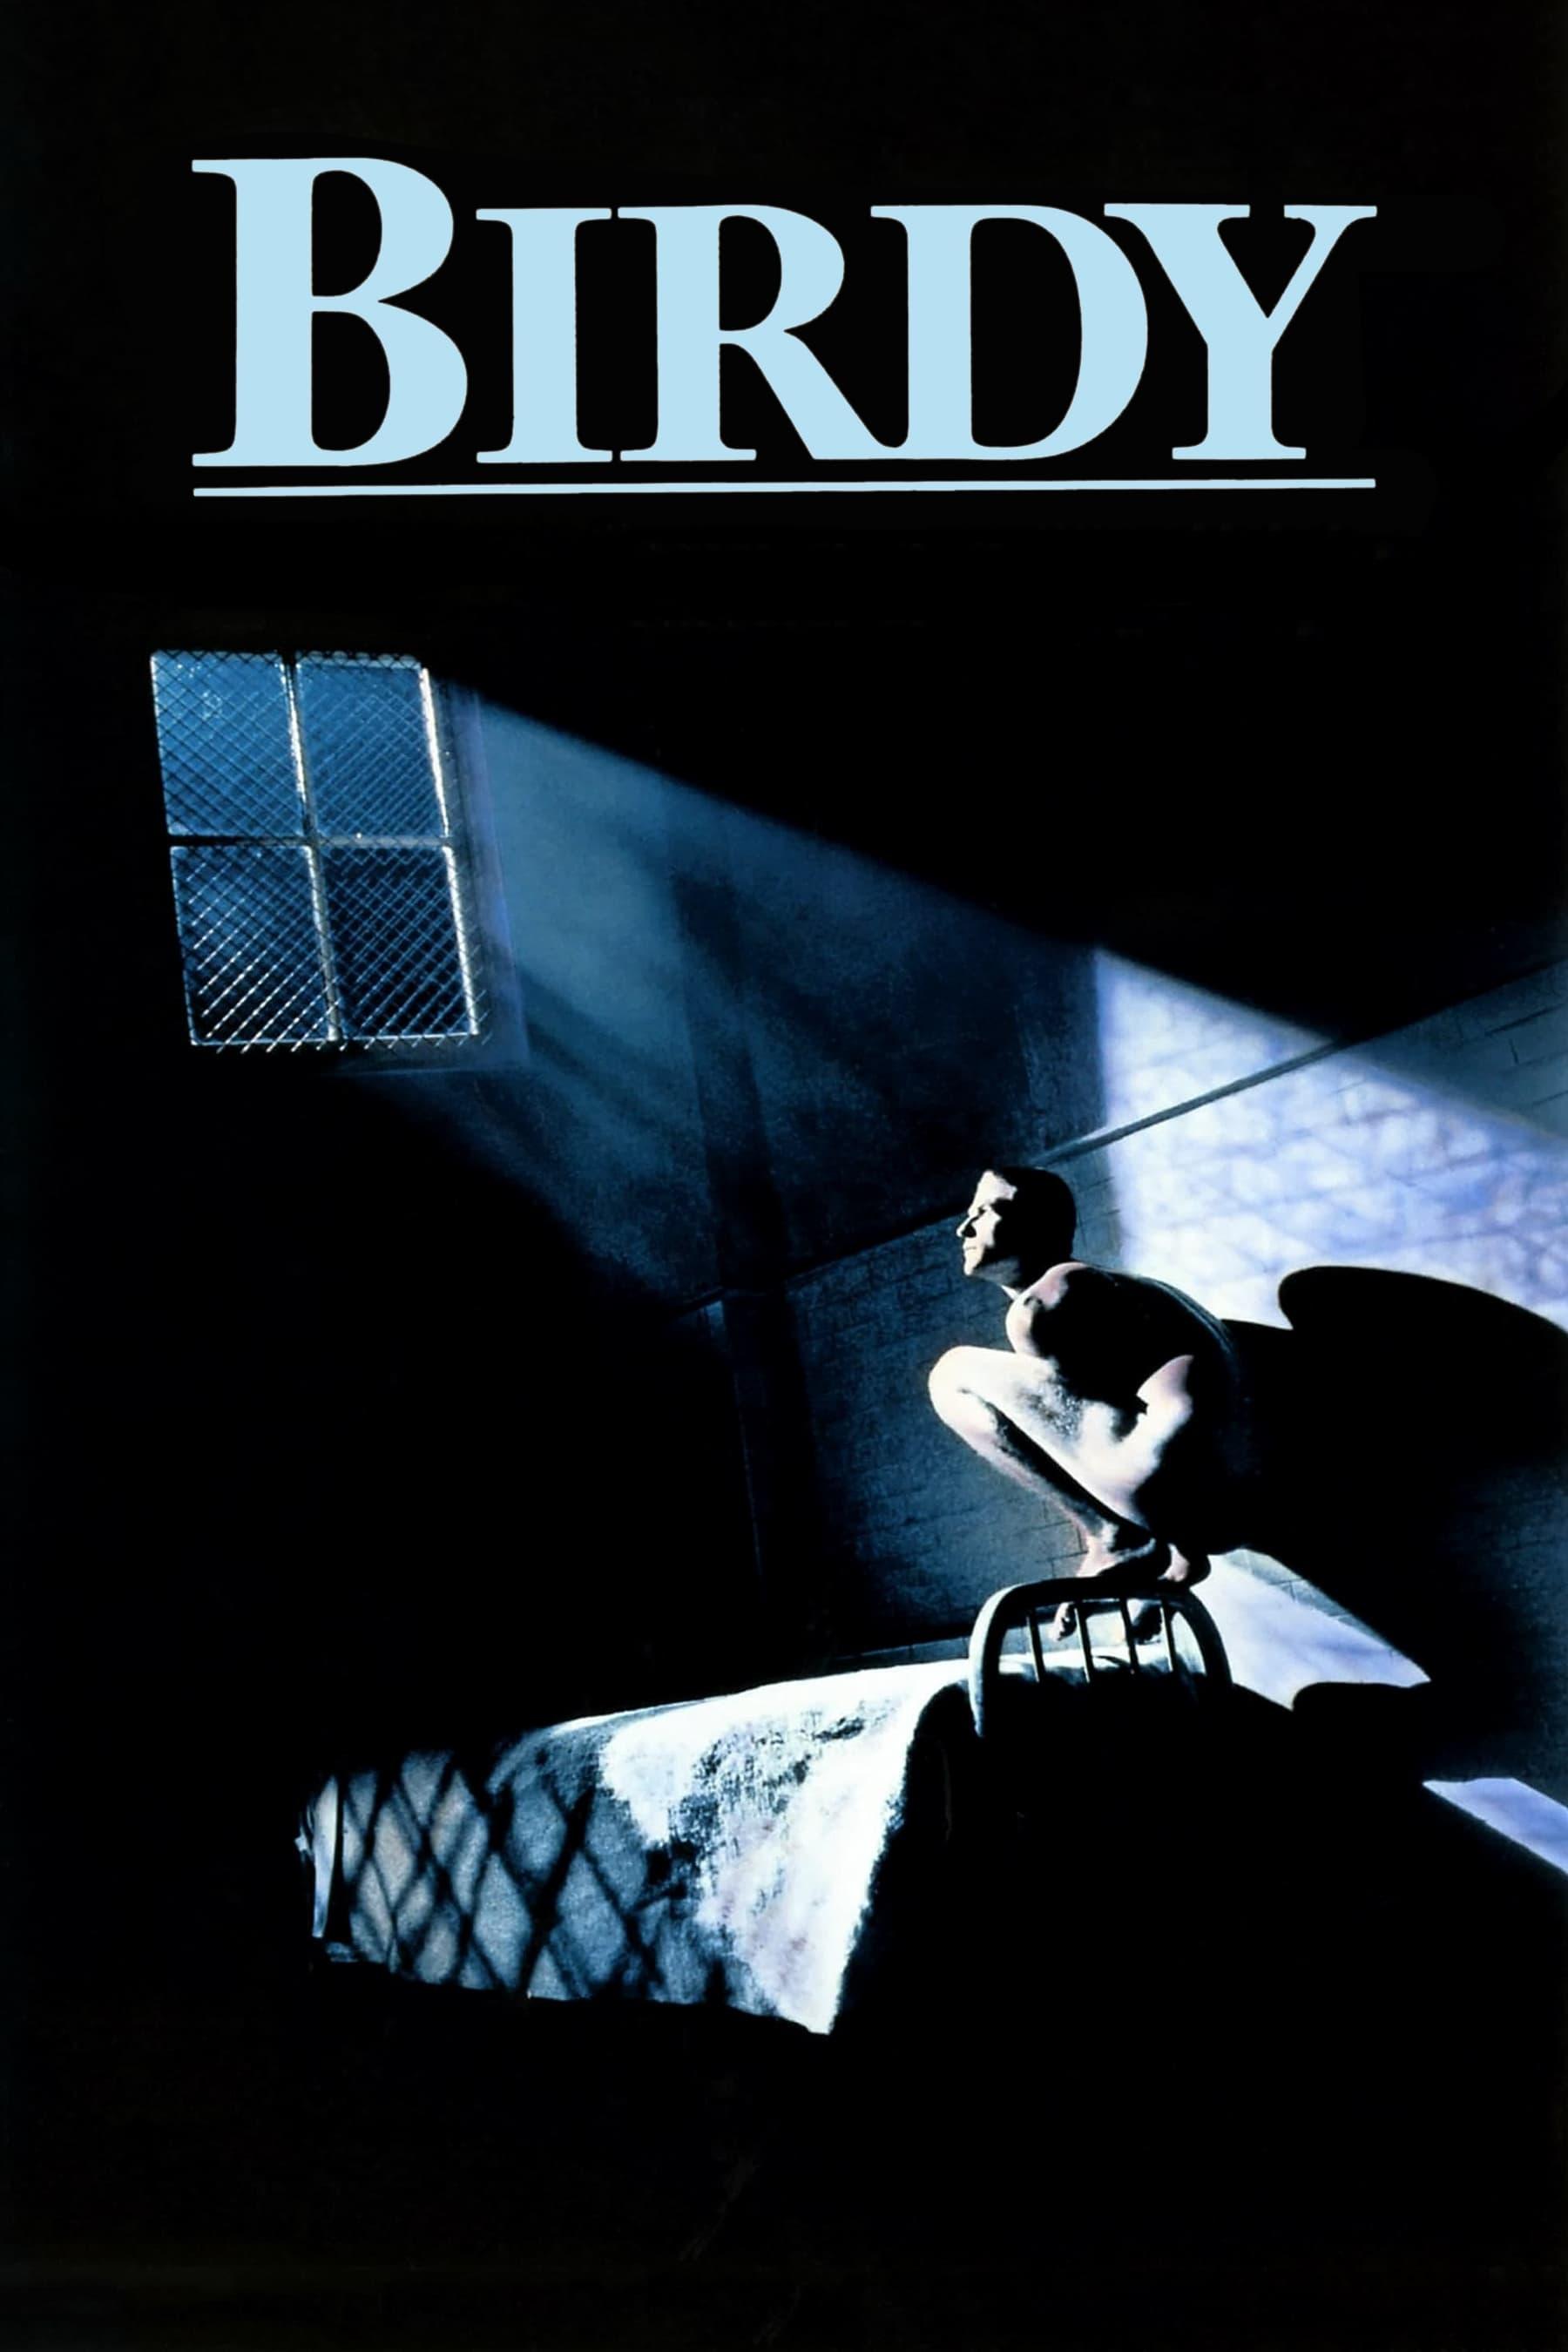 Birdy poster